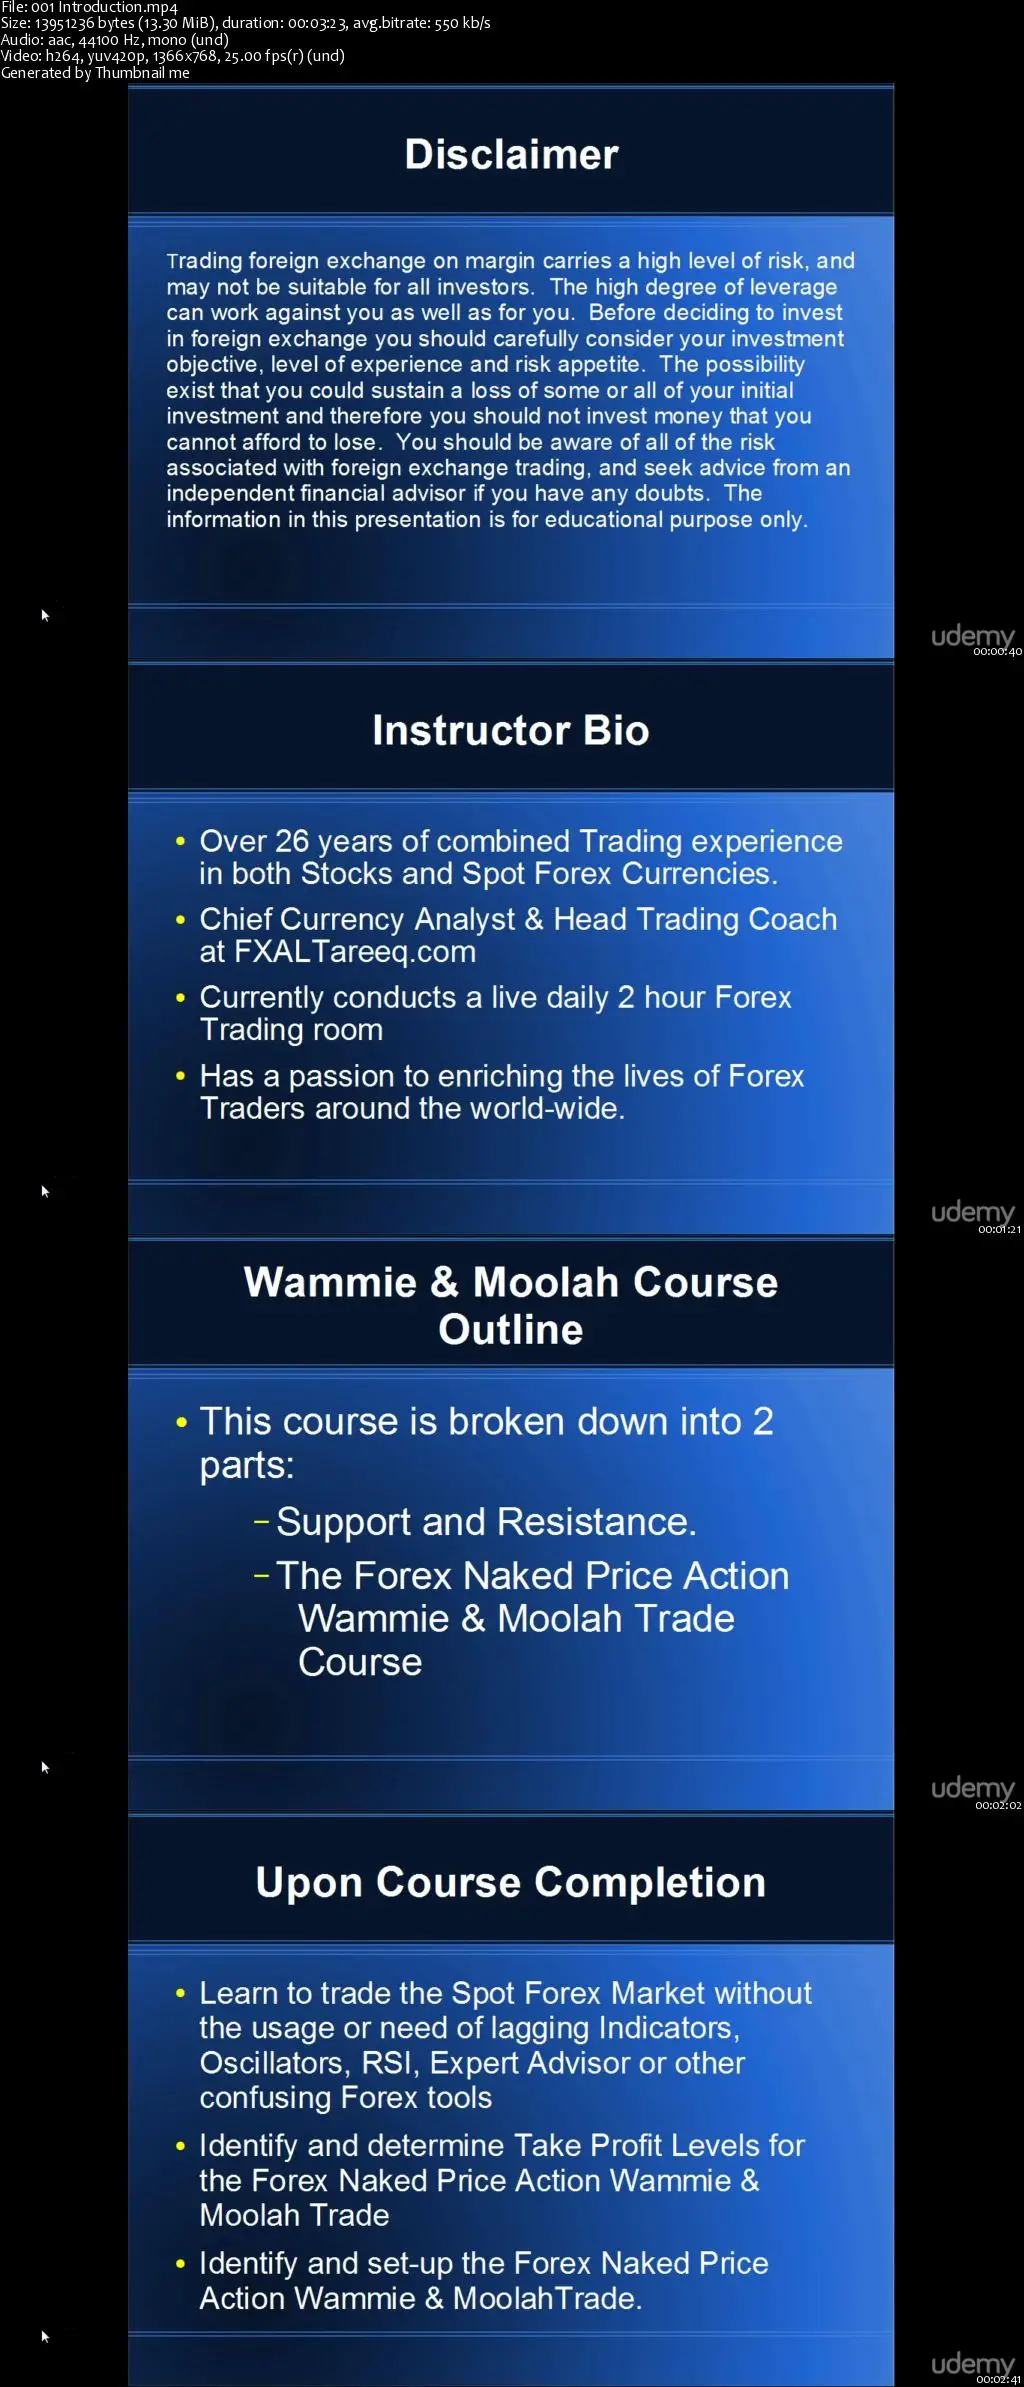 Learn To Trade Forex Naked Price Action Wammie Trade Avaxhome - 